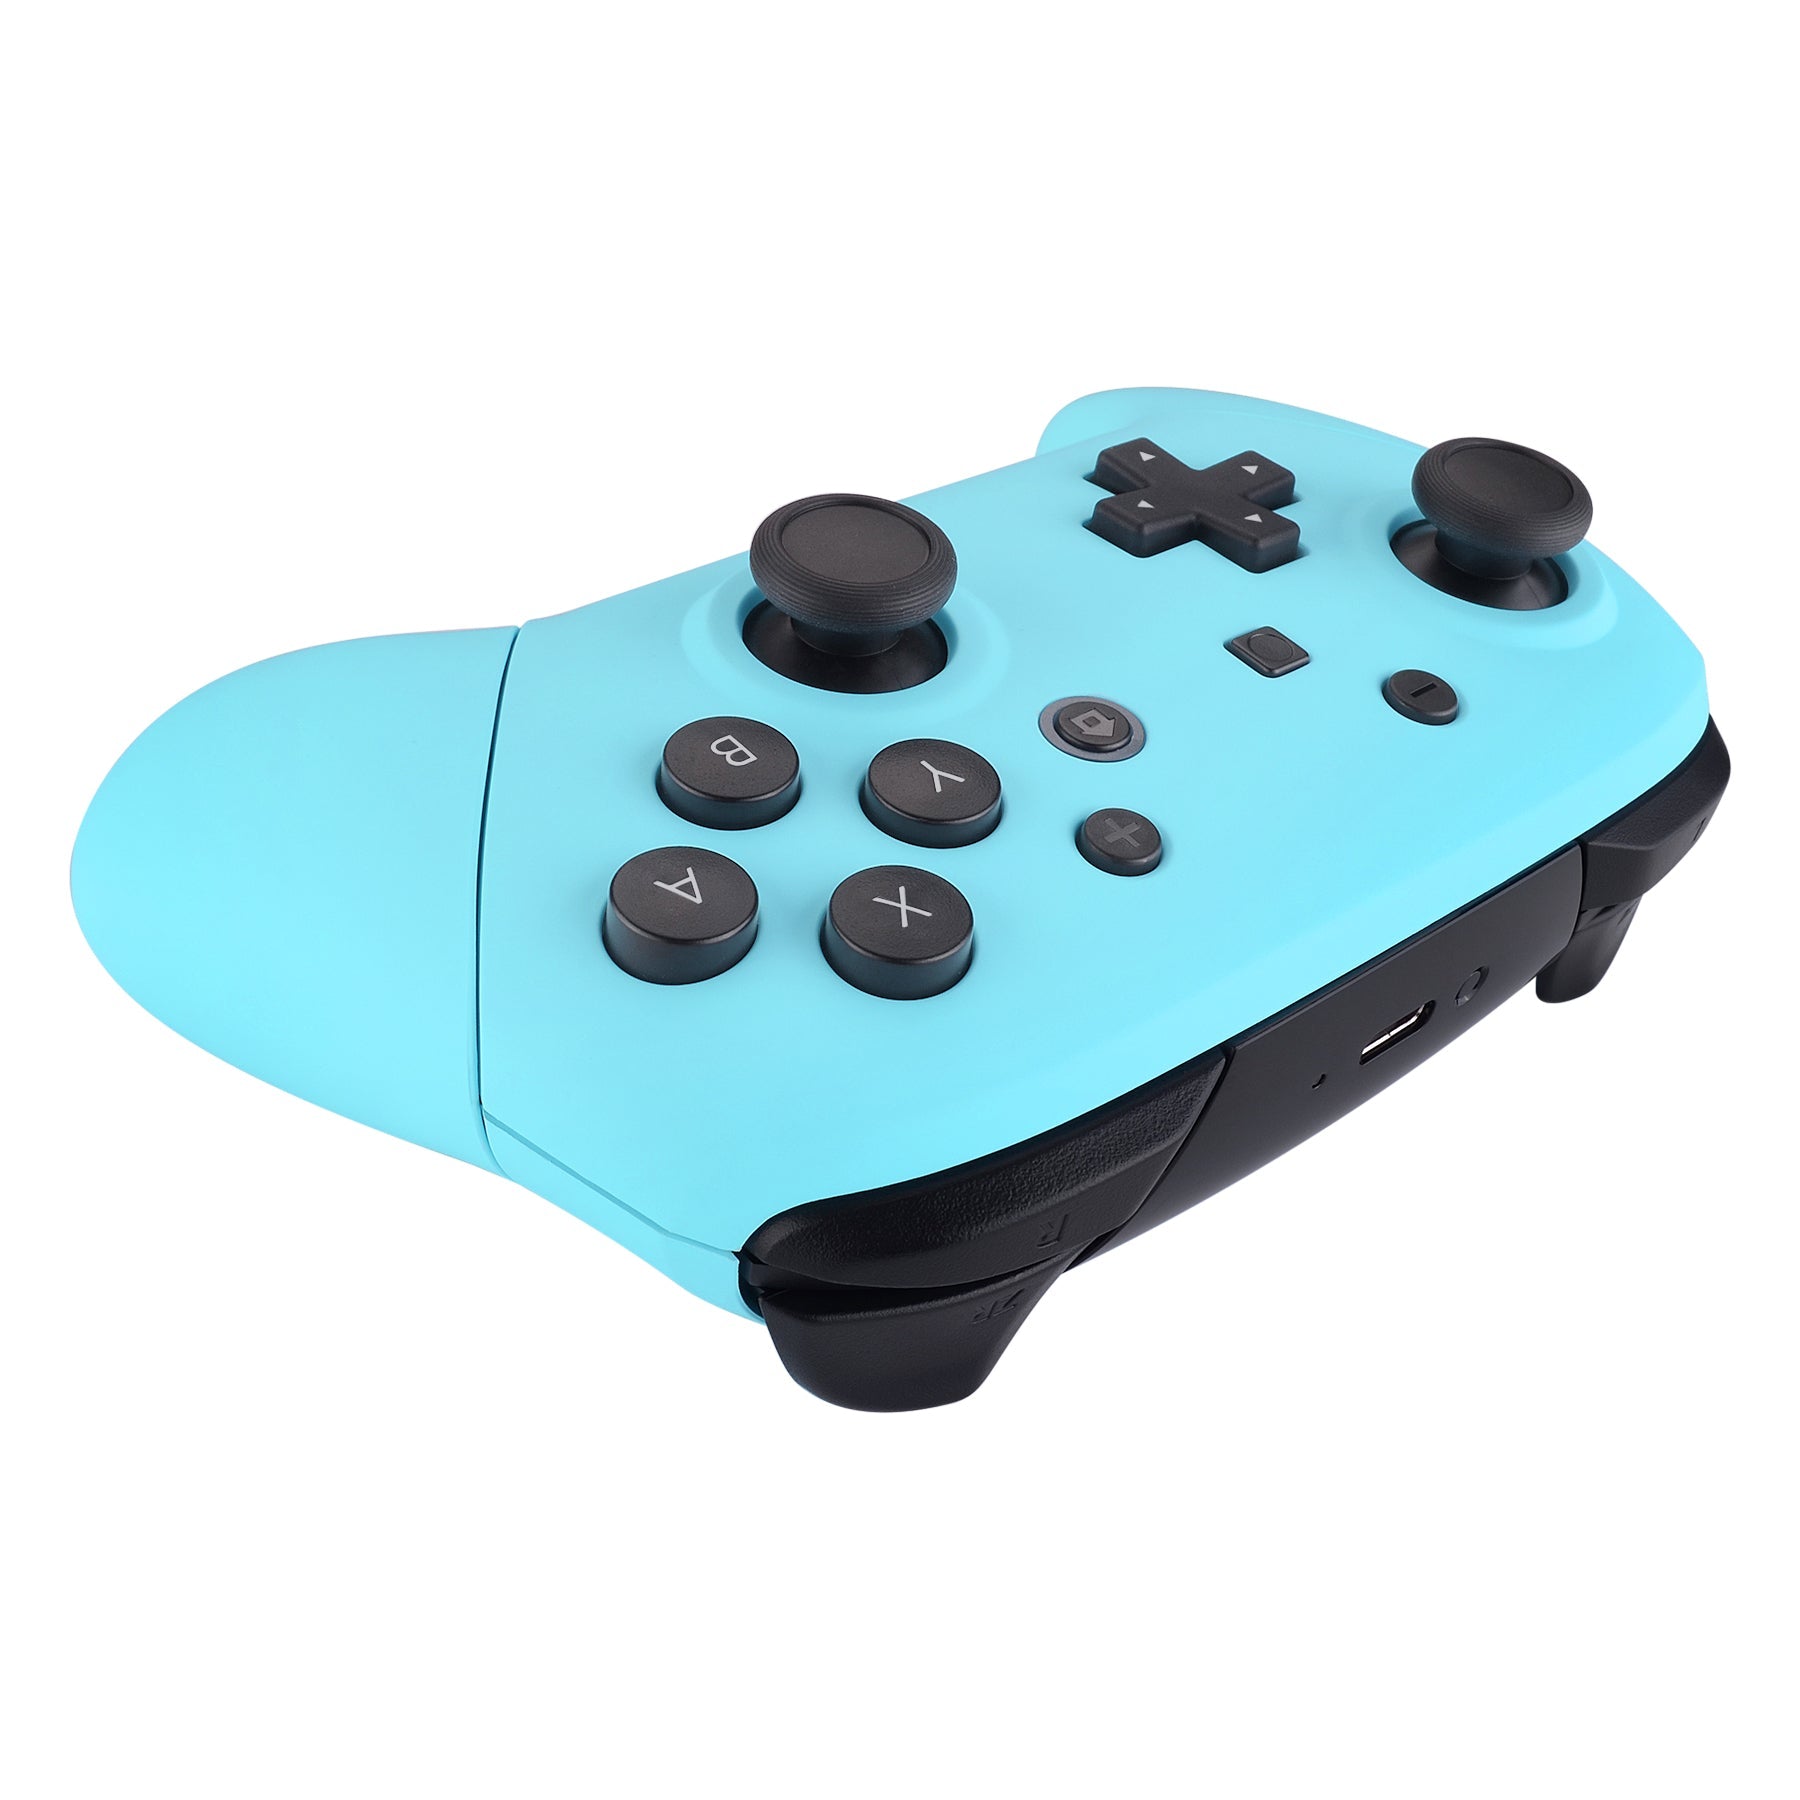 eXtremeRate Retail Heaven Blue Faceplate Backplate Handles for Nintendo Switch Pro Controller, Soft Touch DIY Replacement Grip Housing Shell Cover for Nintendo Switch Pro - Controller NOT Included - FRP308